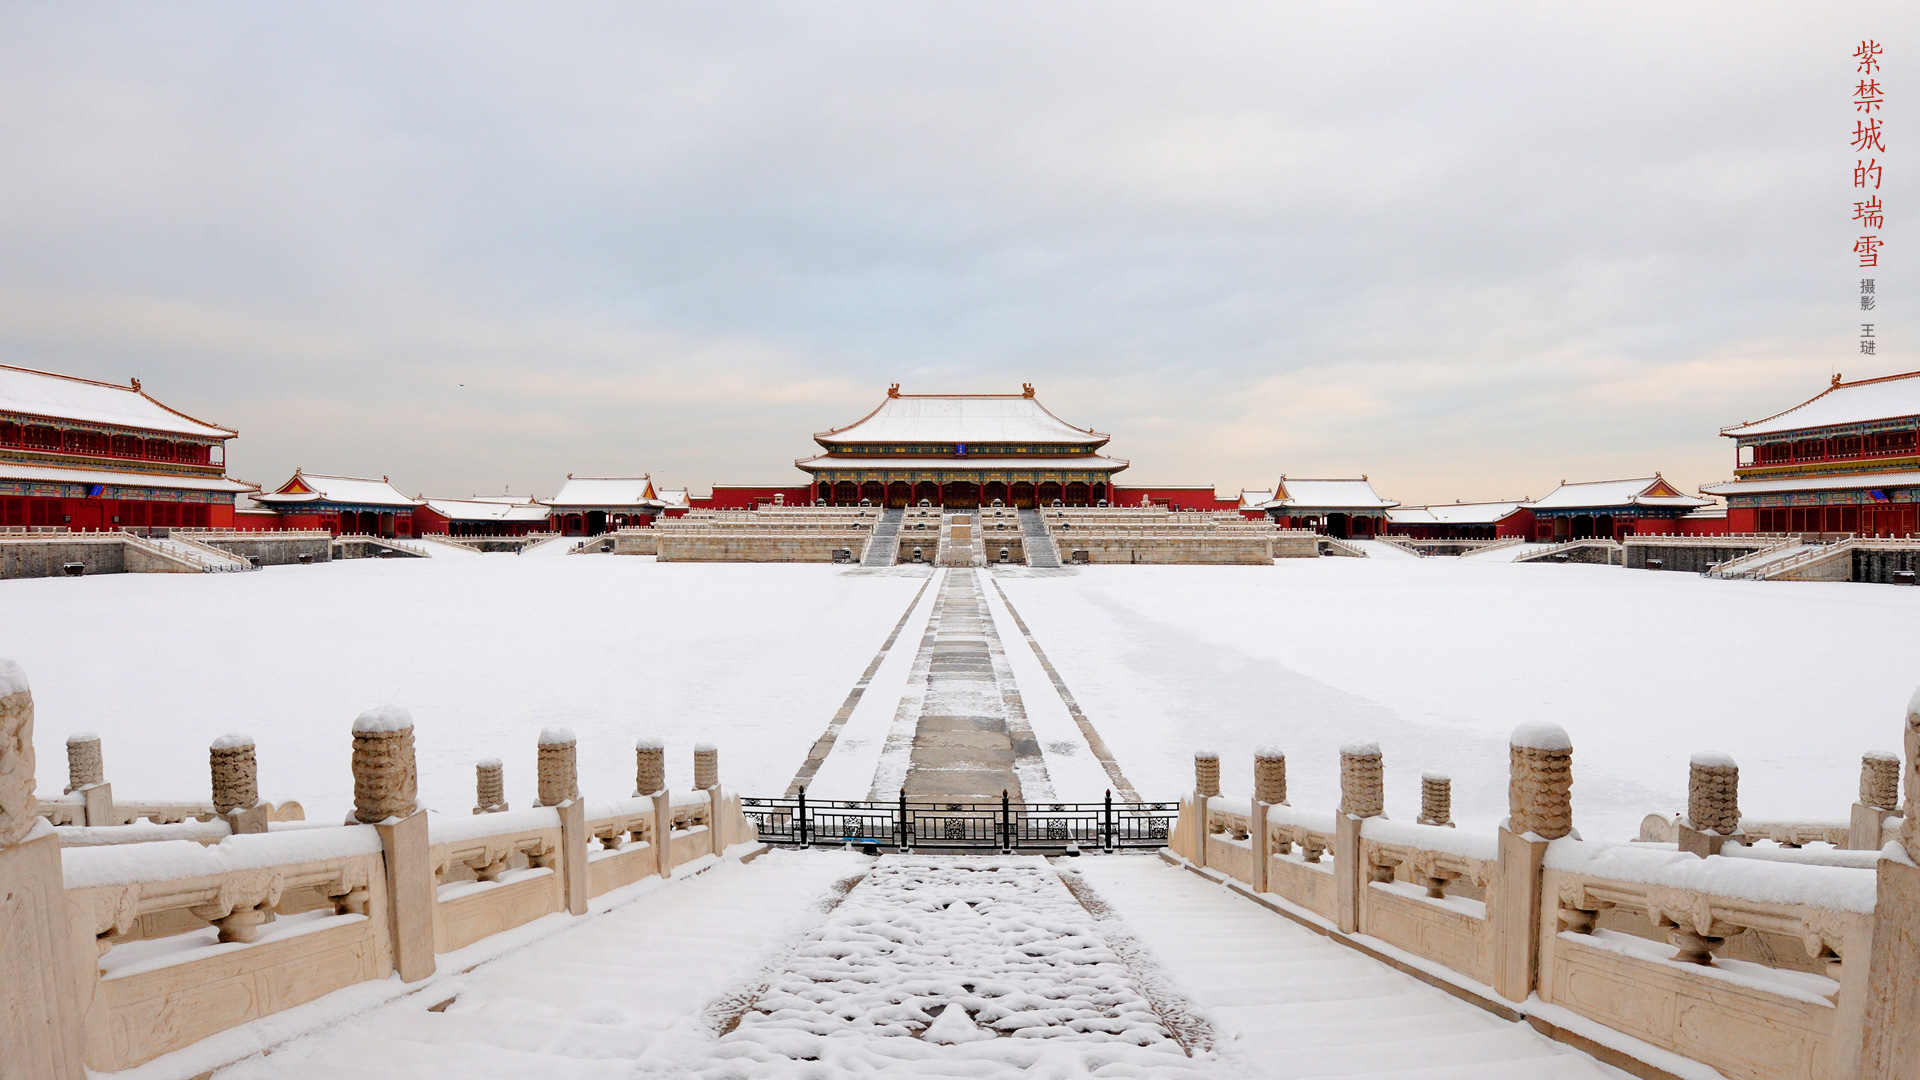 General 1920x1080 Beijing The Imperial Palace snow Asian architecture China Tiananmen Square